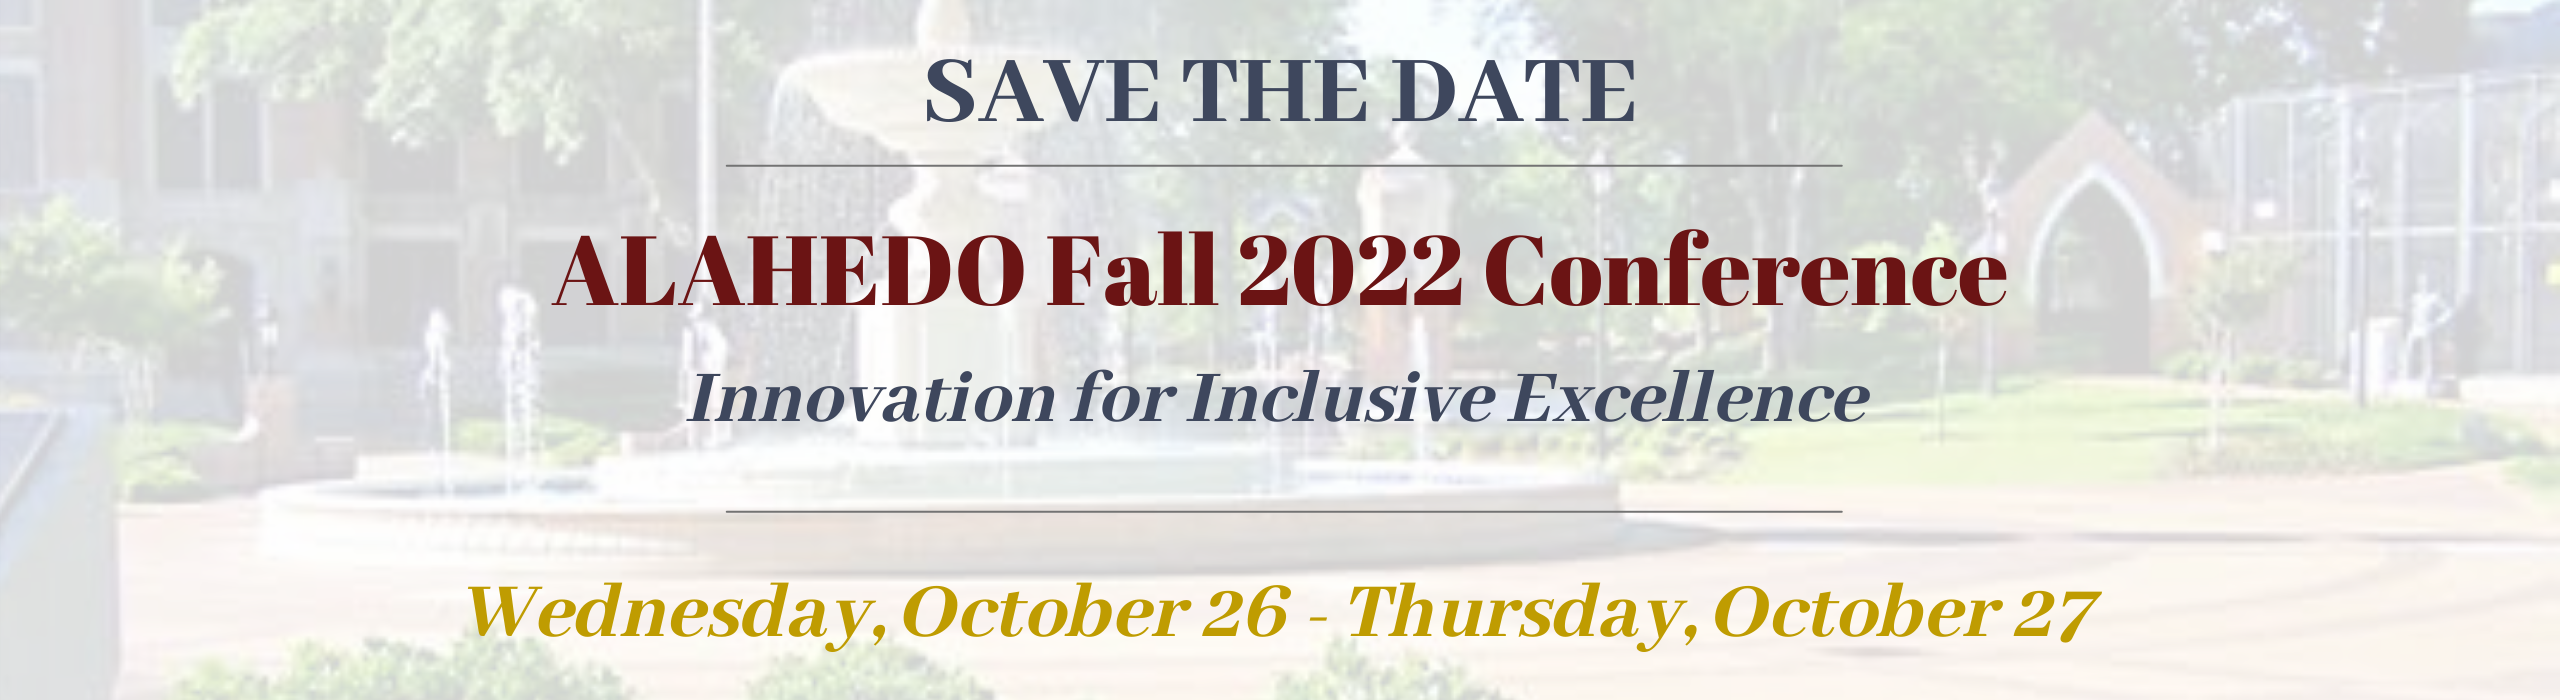 ALAHEDO Fall 2022 Conference  Save The Date 2560  700 Px